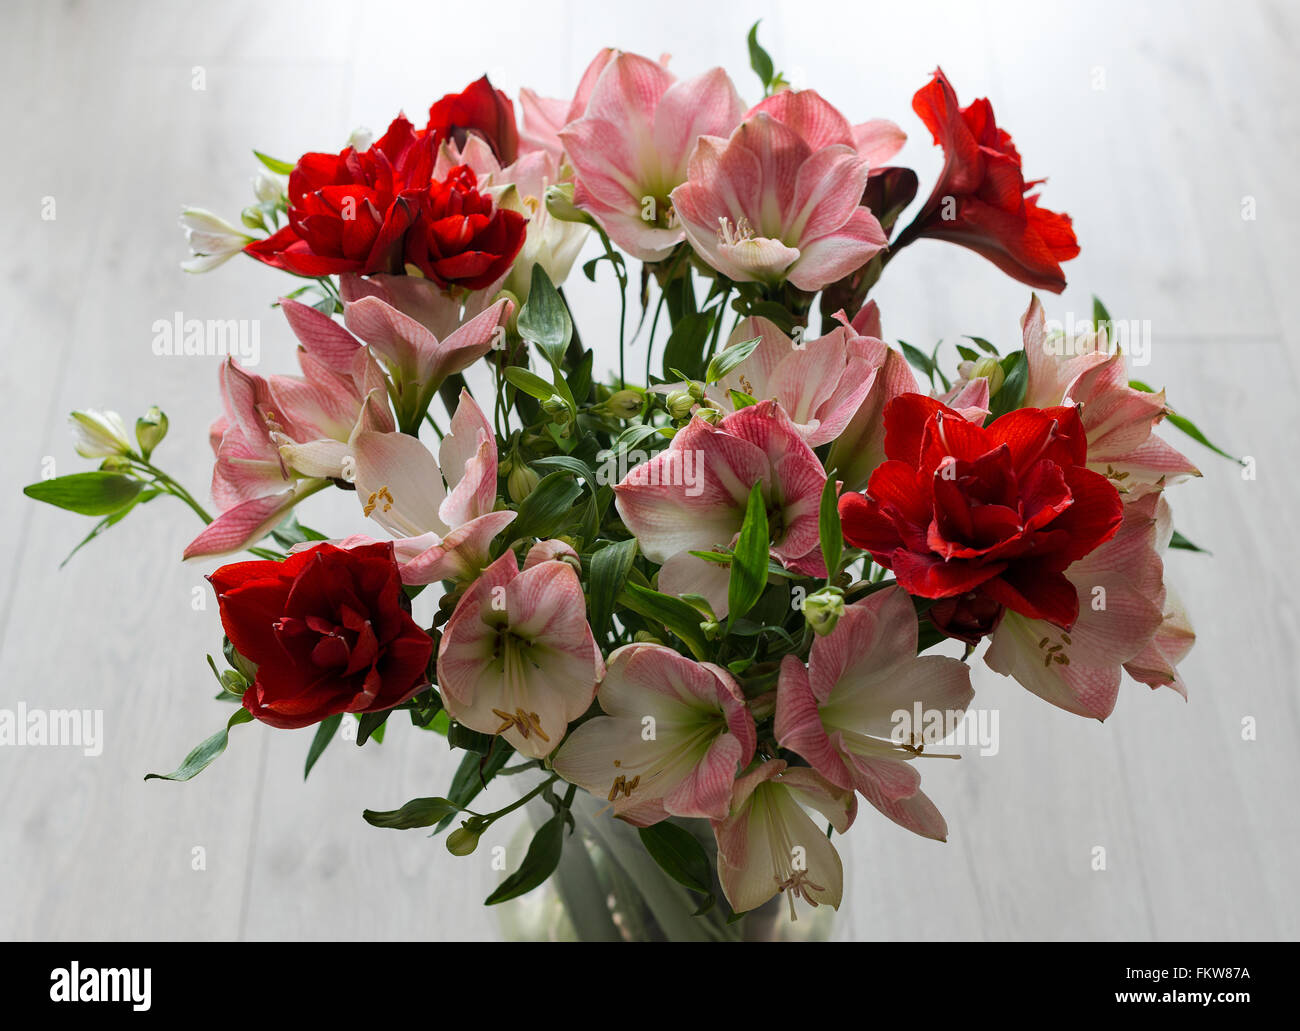 bouquet of red and pink amaryllis flowers on light background Stock Photo